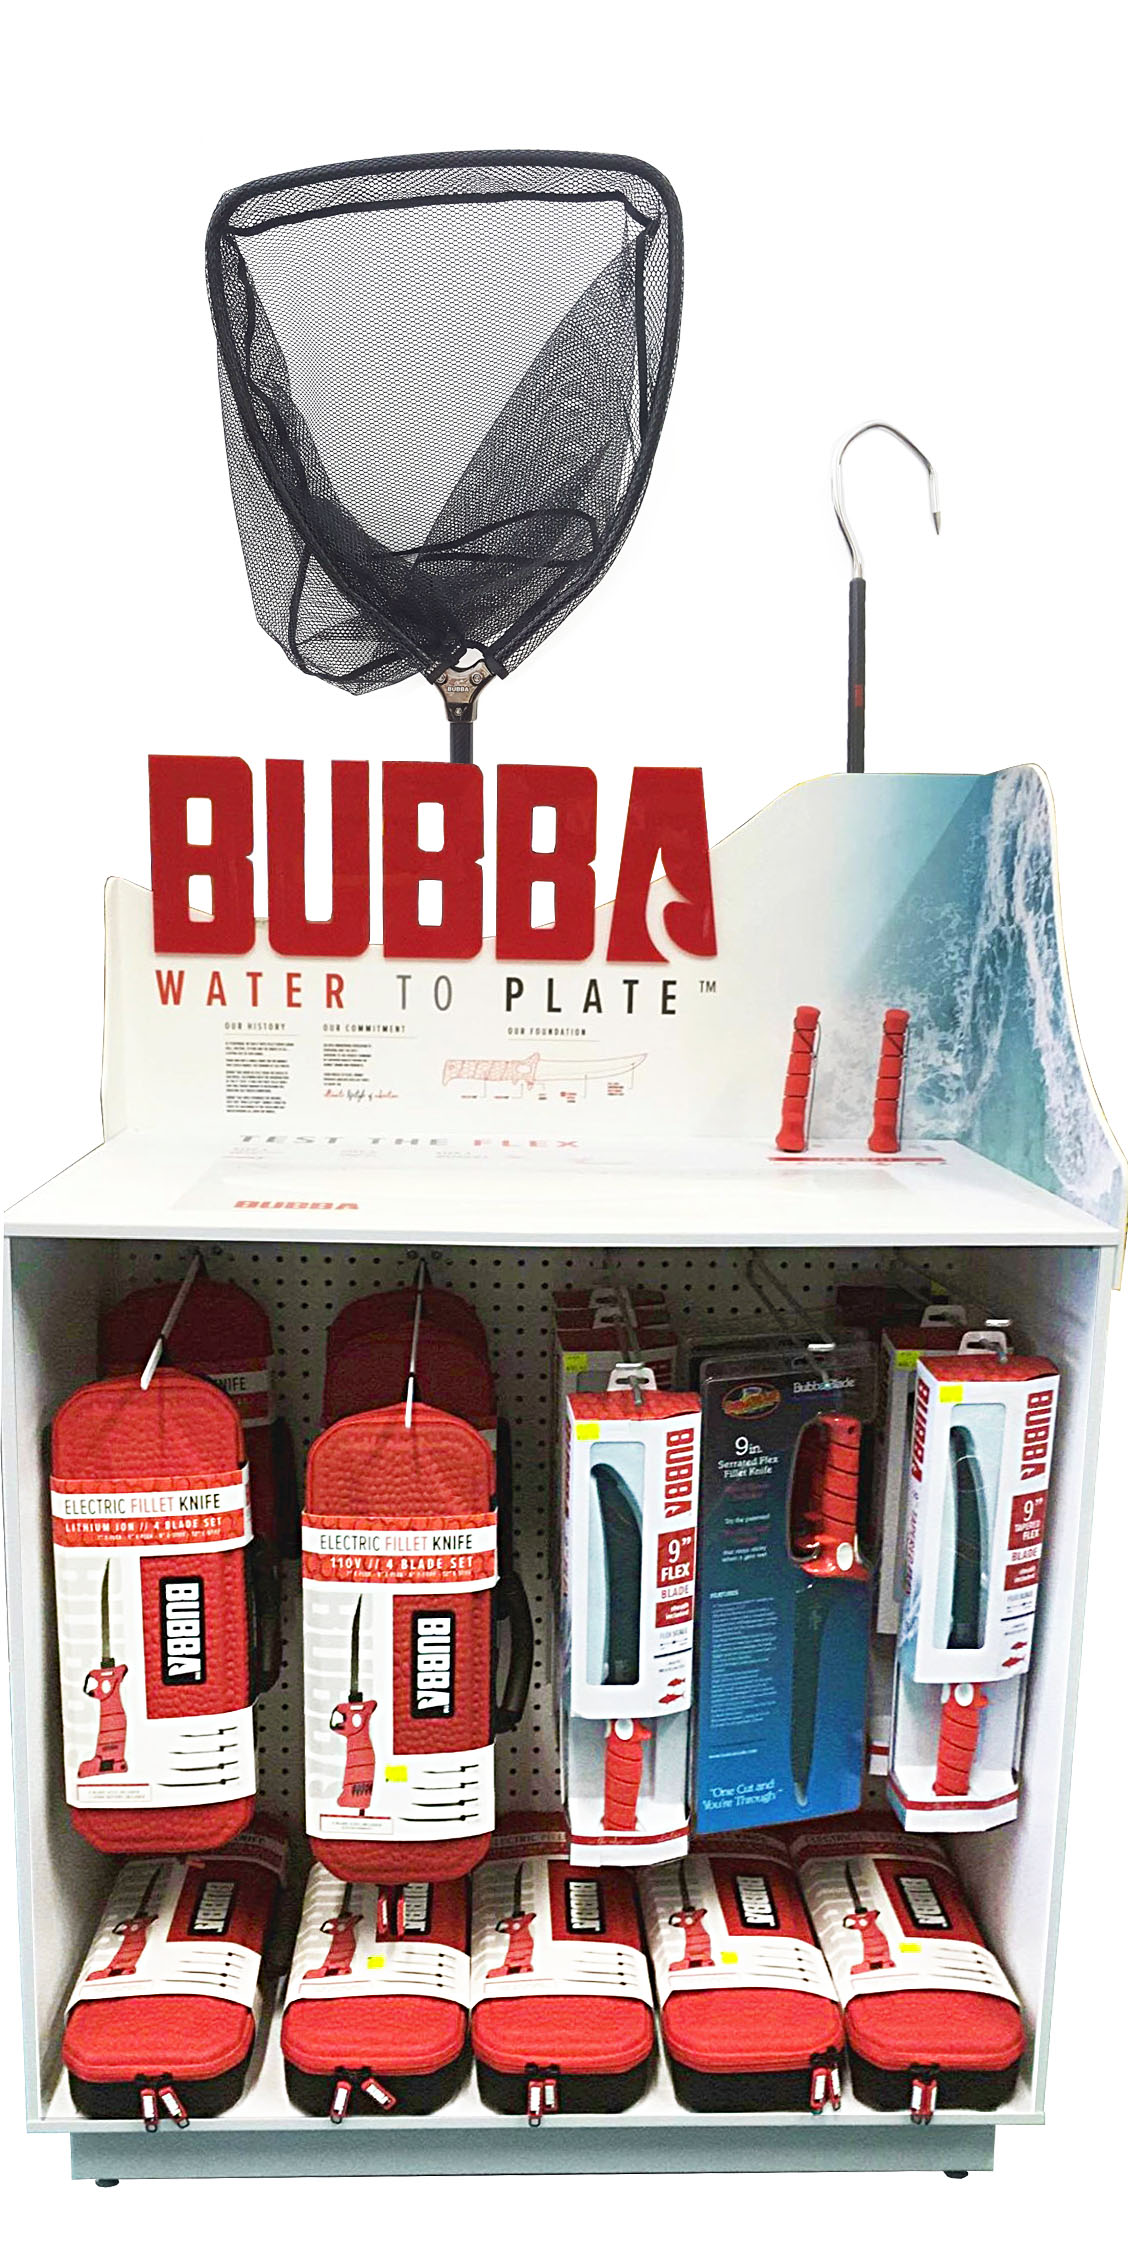 BUBBA Captures Sport Fishing Lifestyle with Latest Merchandising Display